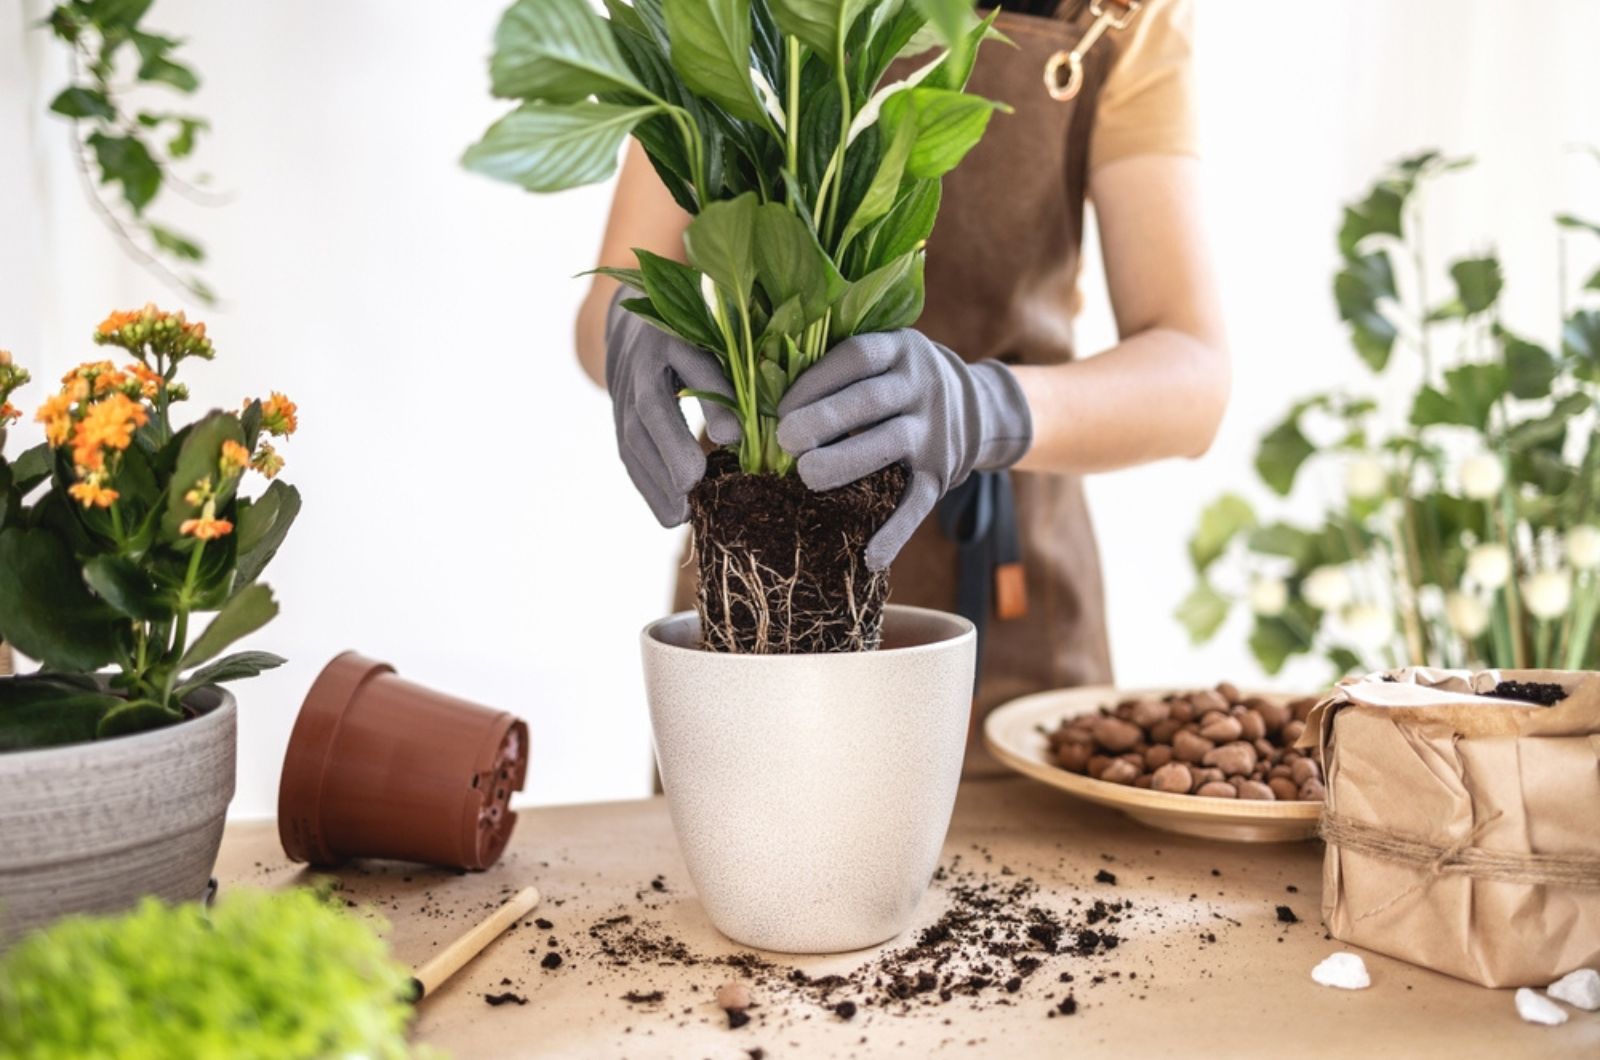 gardener repotting peace lily plant